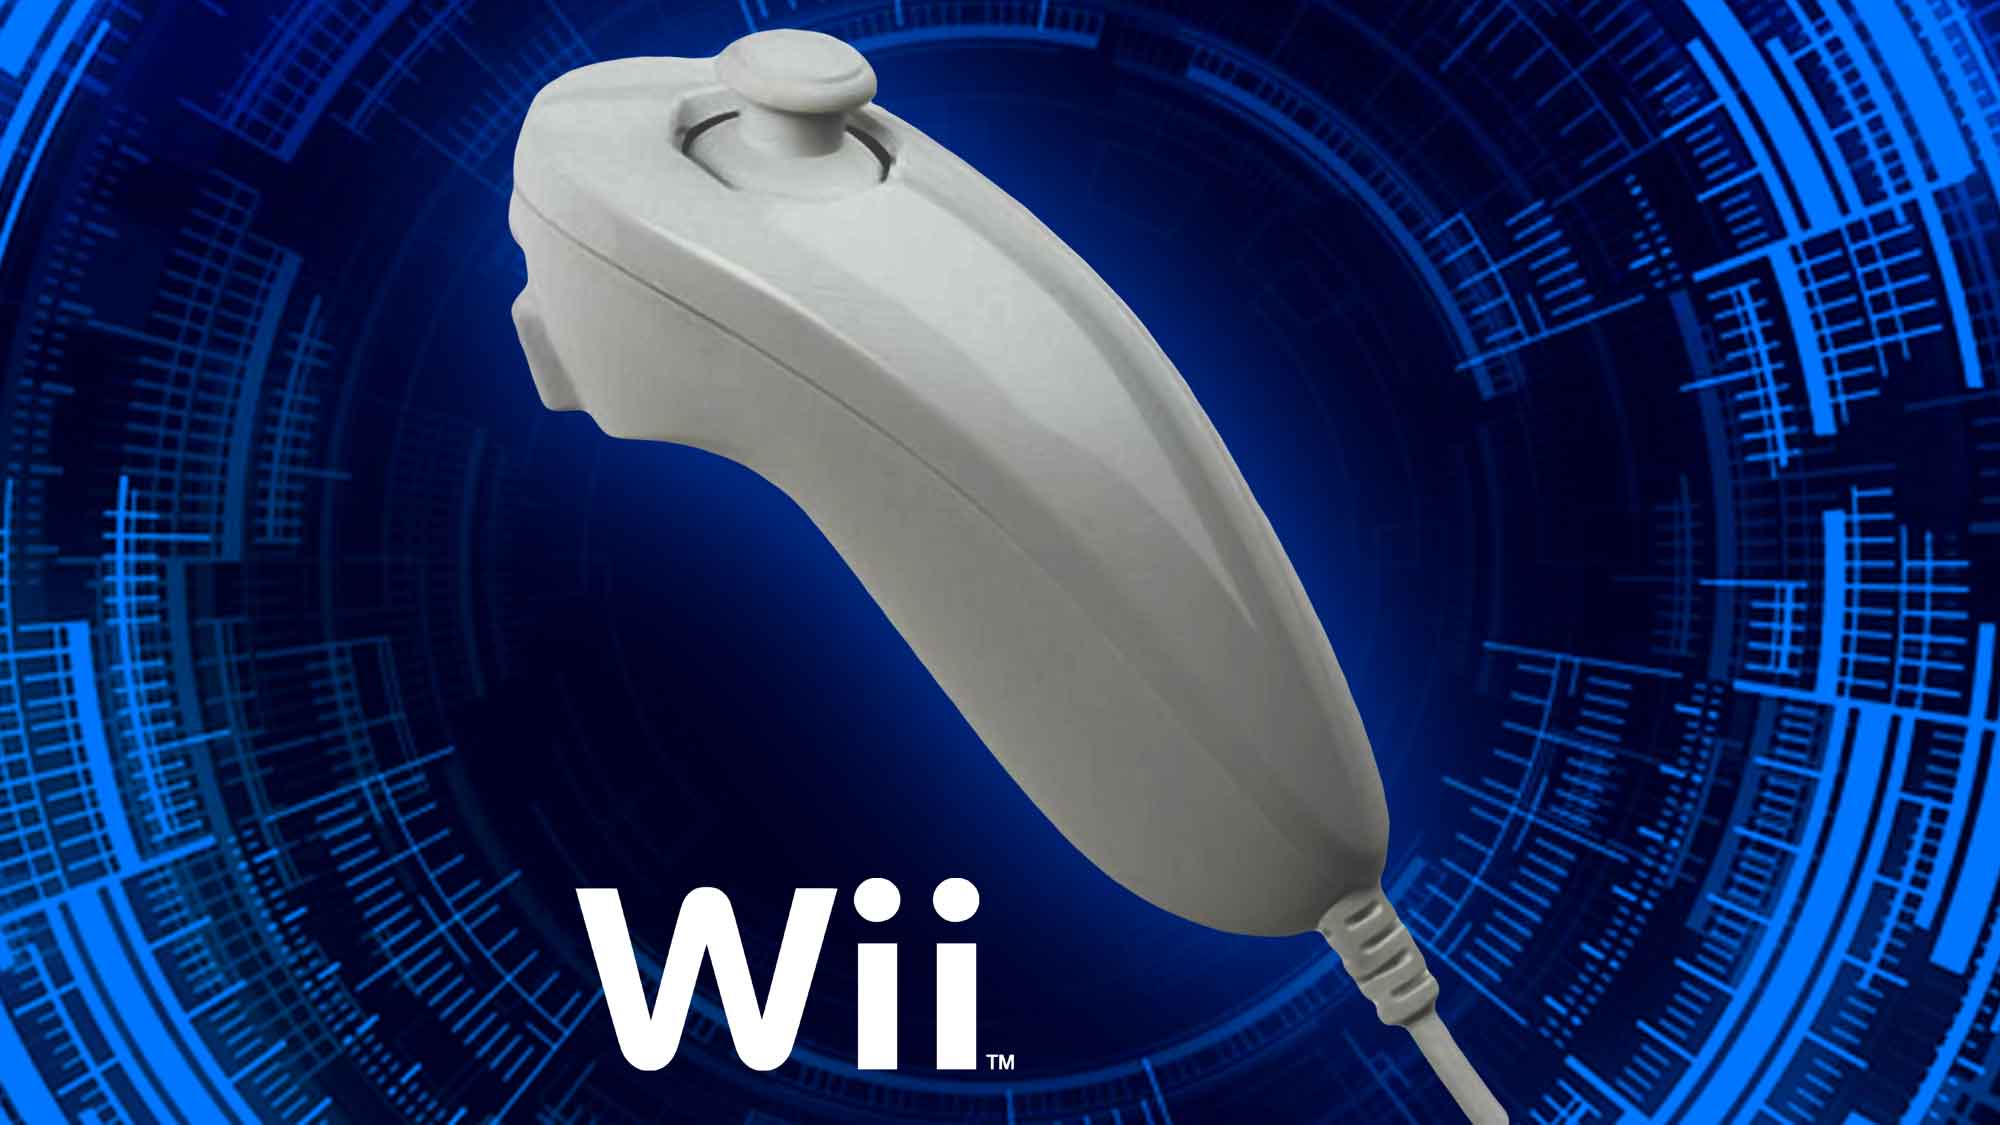 Nintendo Wii Nunchuk Controller - An Innovative Physical Gaming Accessory